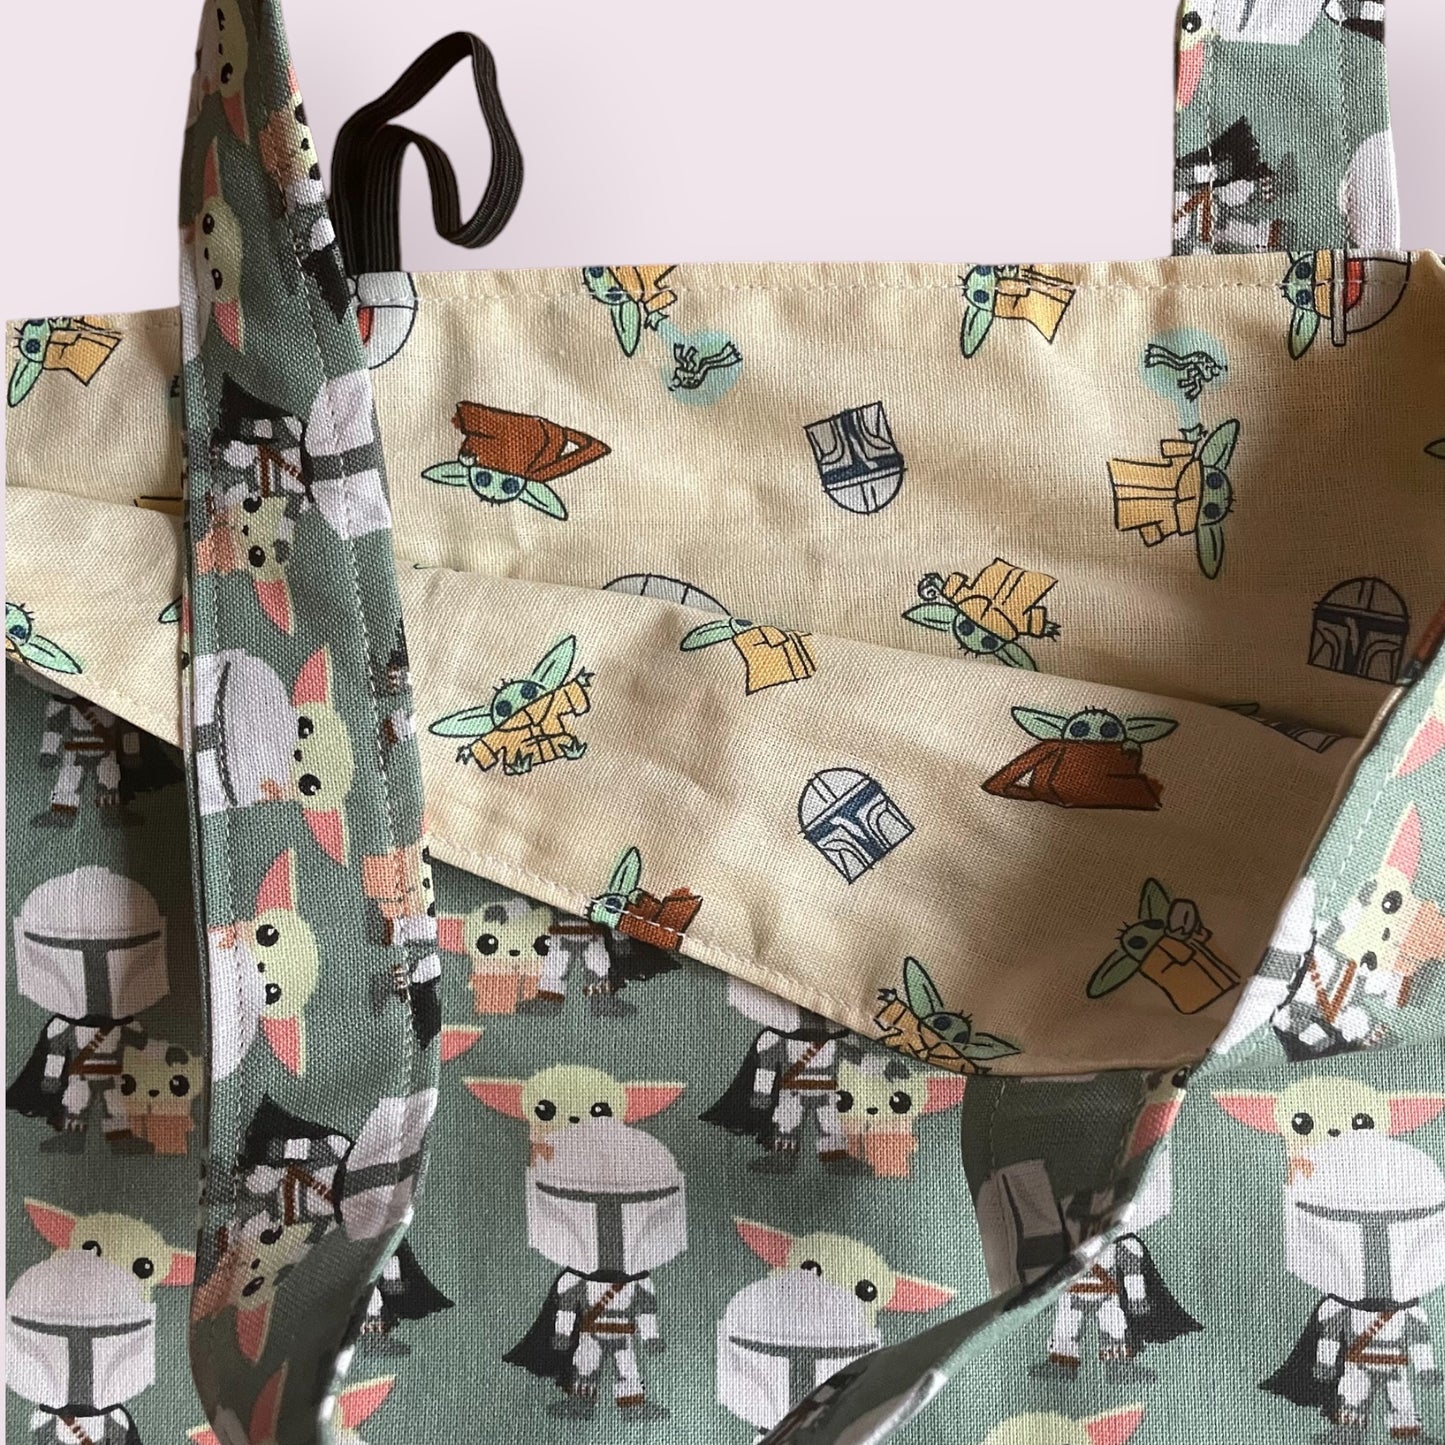 I would like to see the baby reusable/ reversible tote